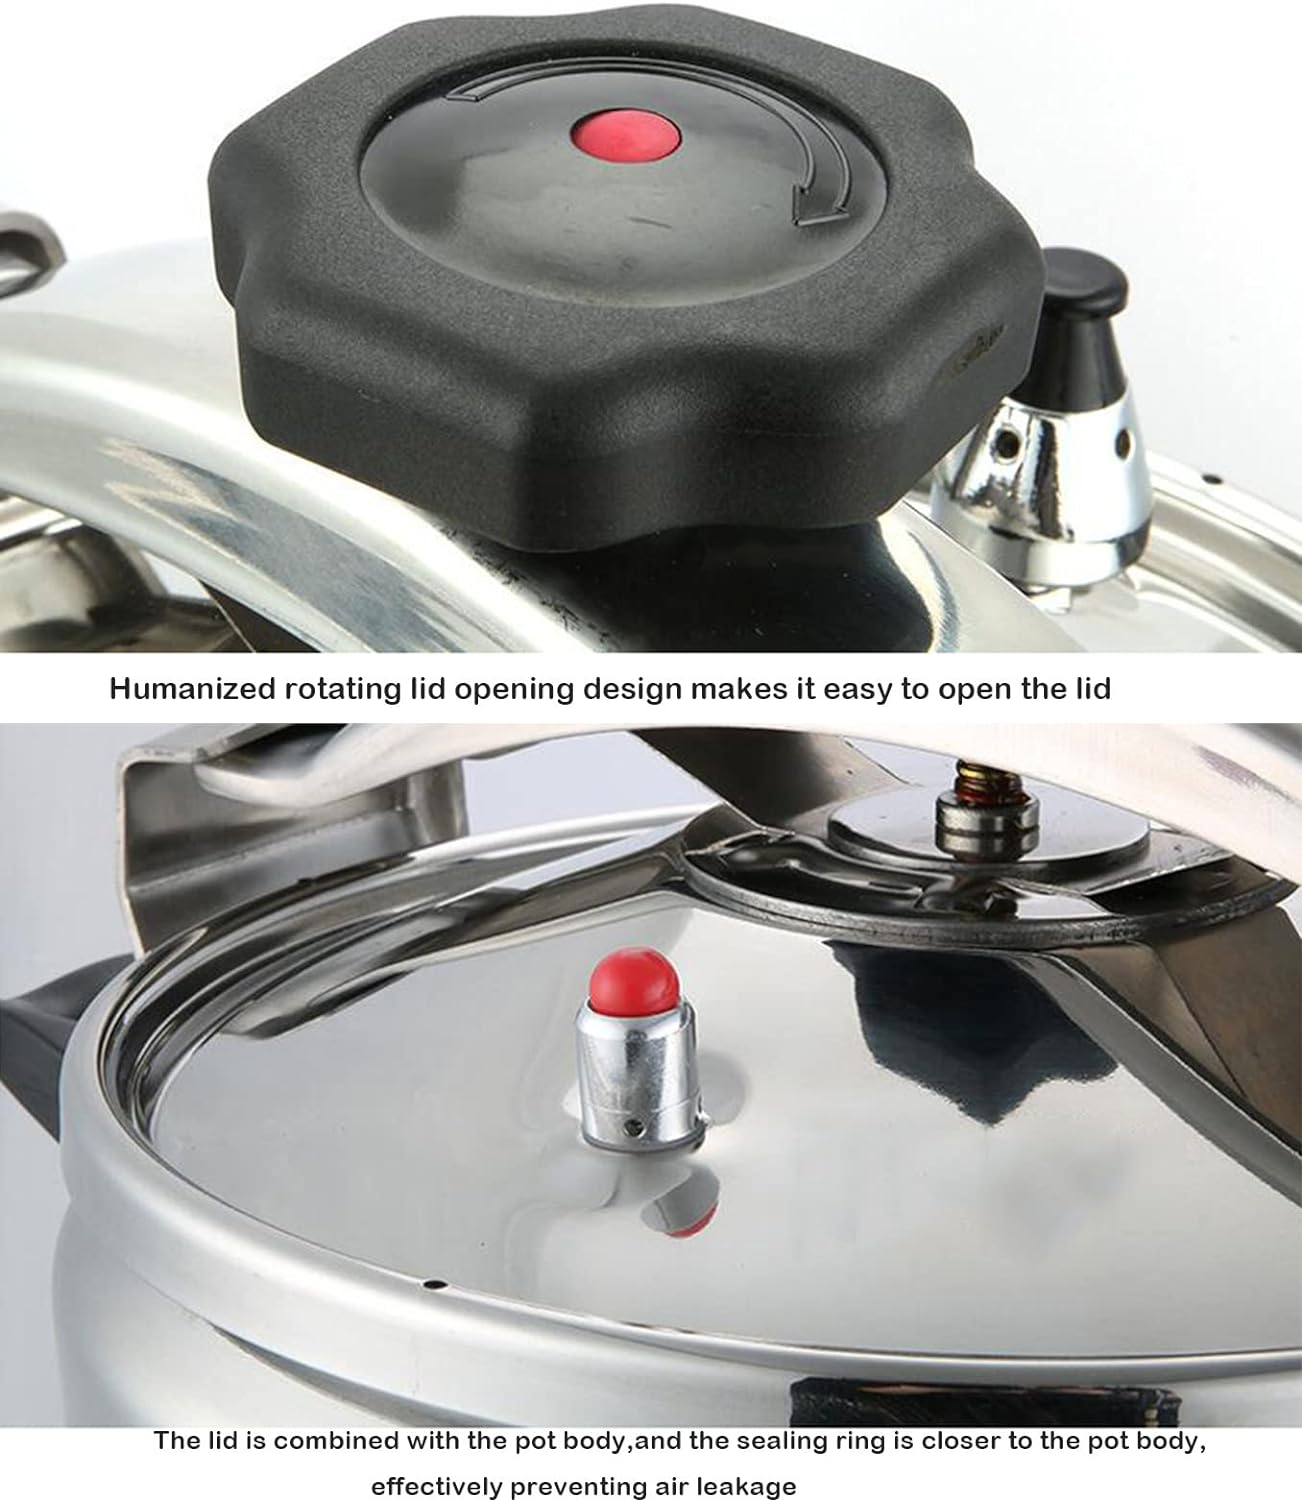 30L Hotel kitchen commercial very large pressure cooker canteen stainless steel multi explosion proof large steamer cooking pressure canners Multiple,applicable:Gas stove/induction cooker/Open flame